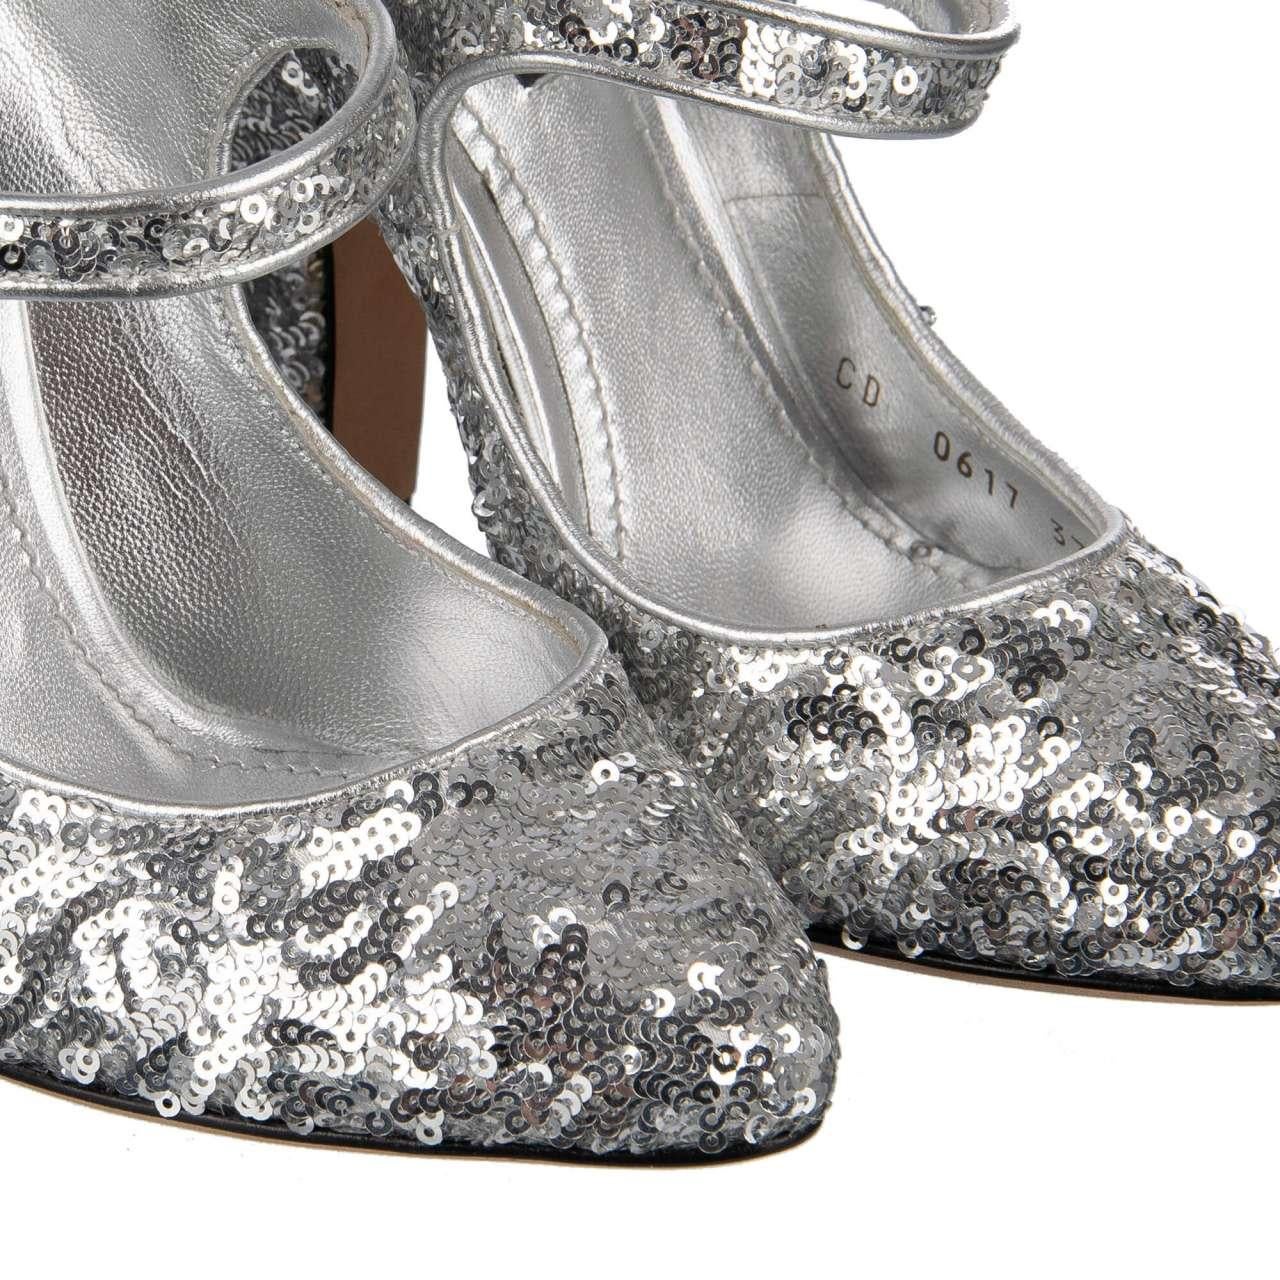 - Sequined Mary Jane Pumps VALLY in silver by DOLCE & GABBANA Black Label - RUNWAY - Dolce & Gabbana Fashion Show - Former RRP: EUR 495 - MADE IN ITALY - New with box - Model: CD0617-AE427-8B418 - Material: 68% Polyester, 32% Lambskin - Inside